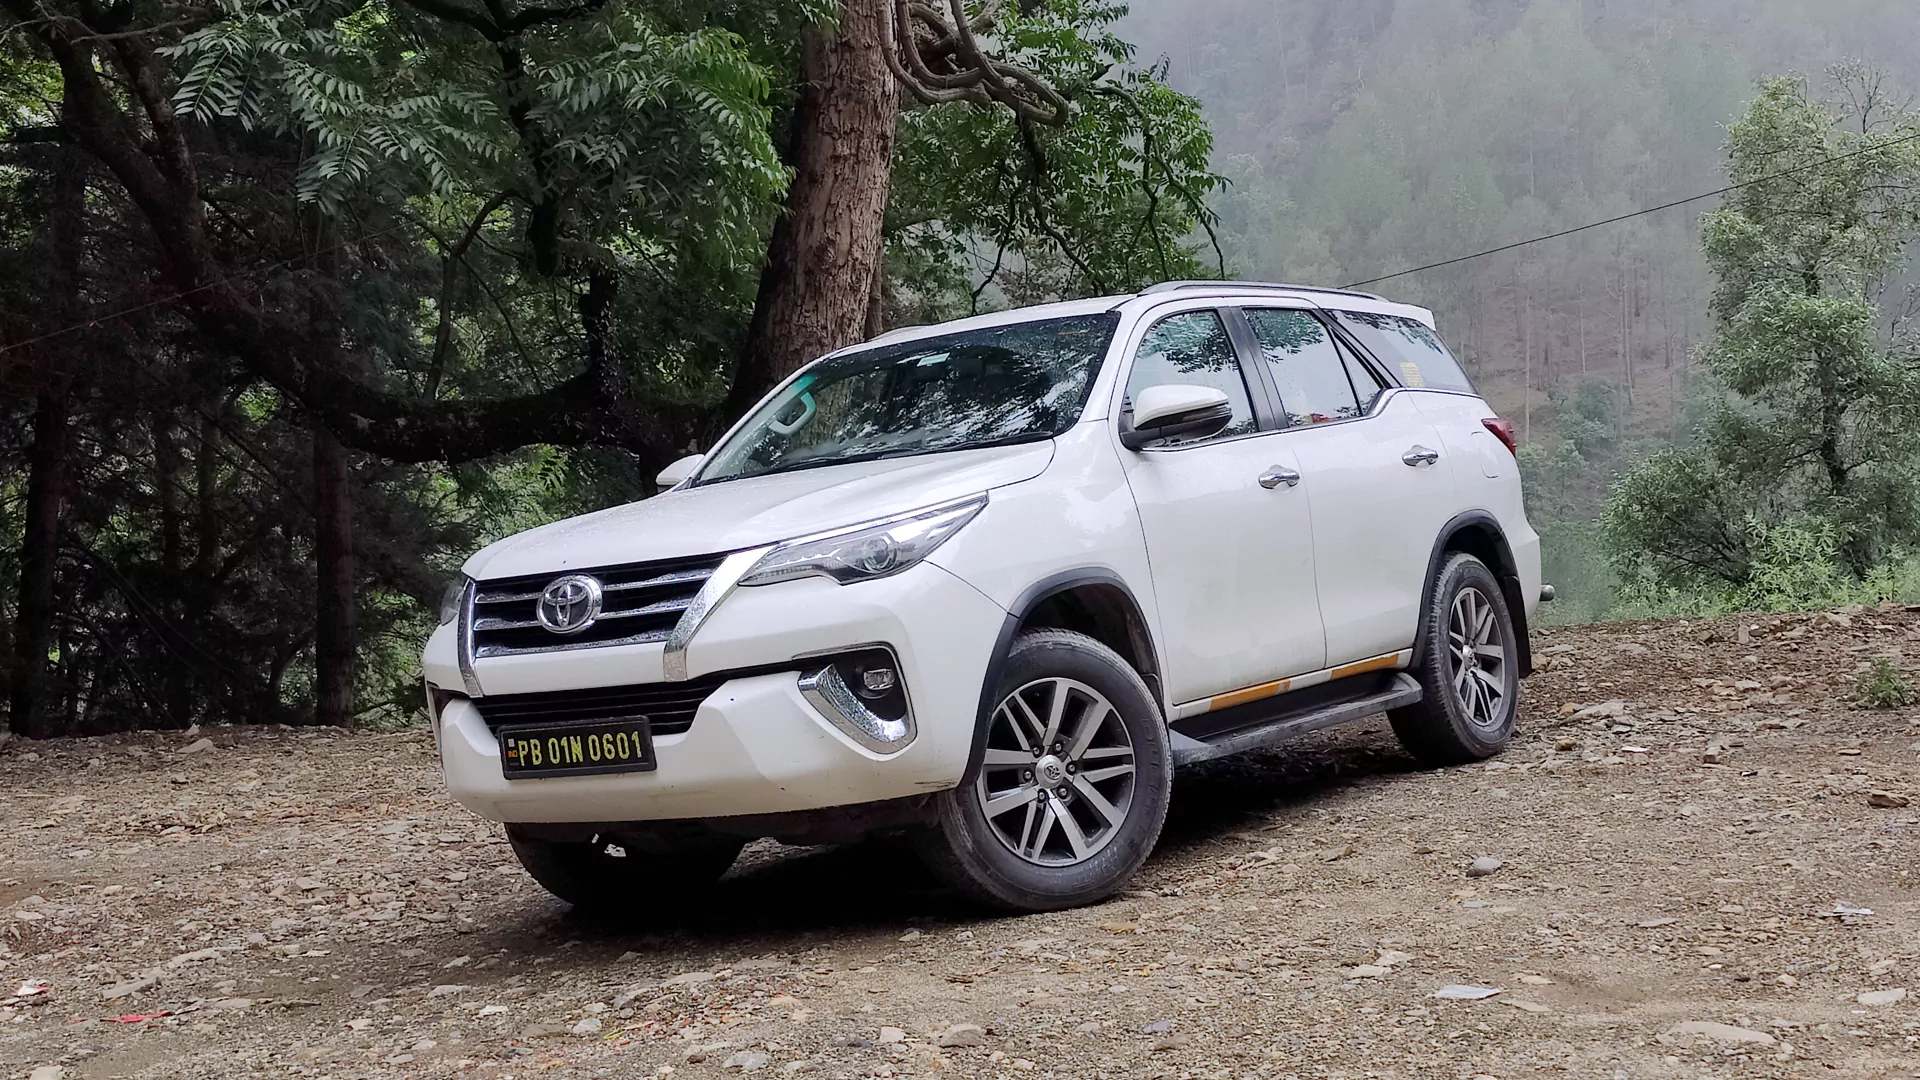 Toyota Fortuner 4x4 for Hill Station Tour Self Drive